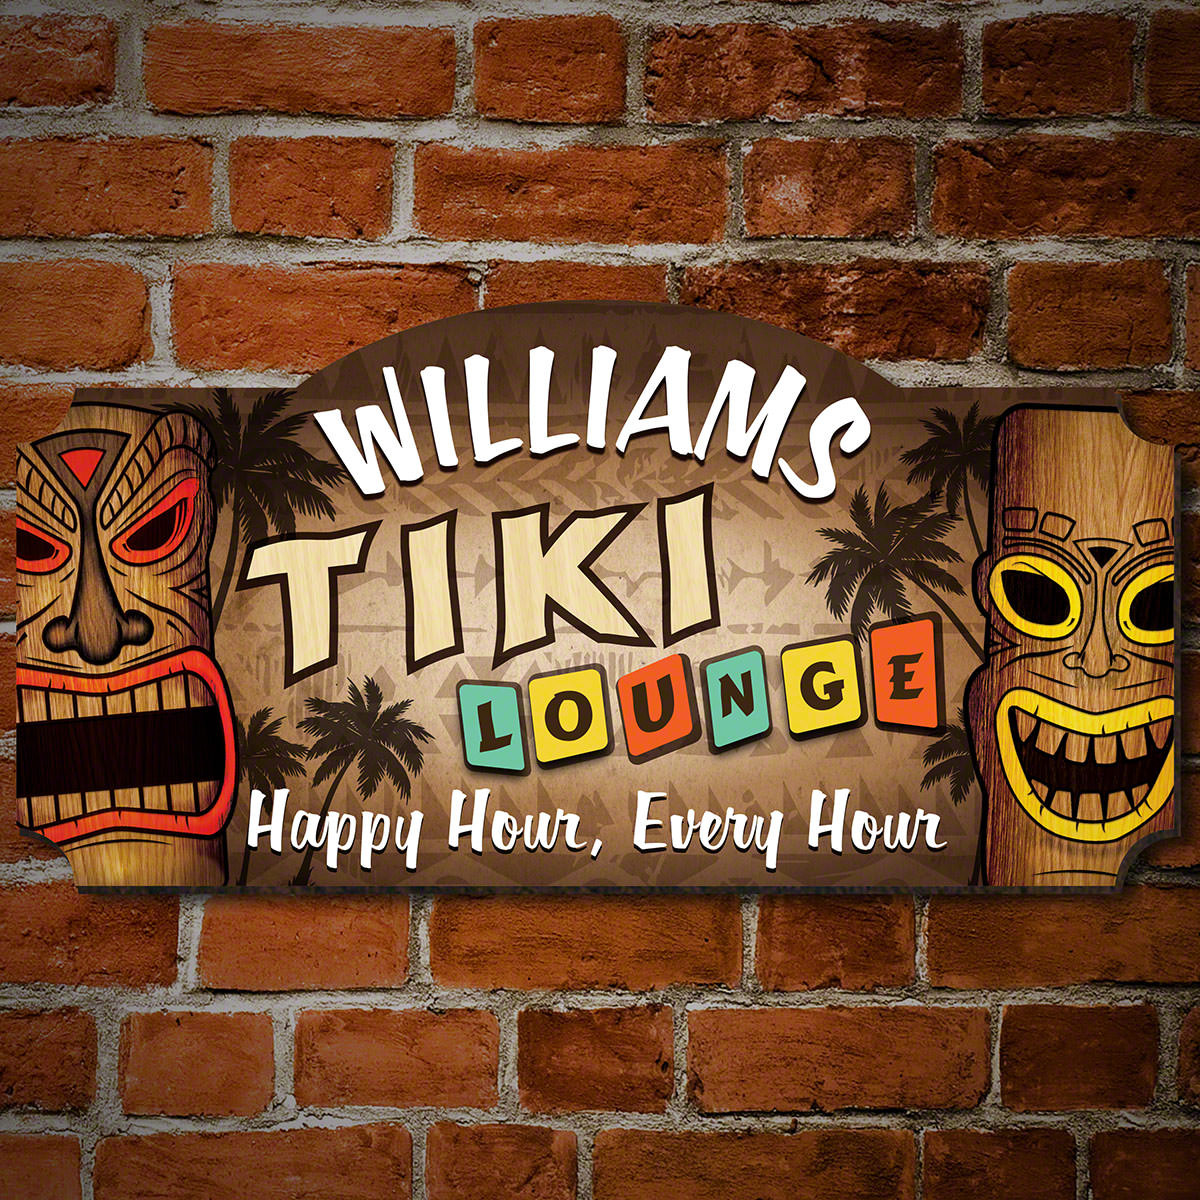 Thereâ€™s nothing like a colorful and personalized tiki bar sign to give your home bar a bright and cultural vibe. This brilliant tiki lounge sign is personalized with two lines of text, so you can make it perfect for your home bar. Whether youâ€™re at ho #bar